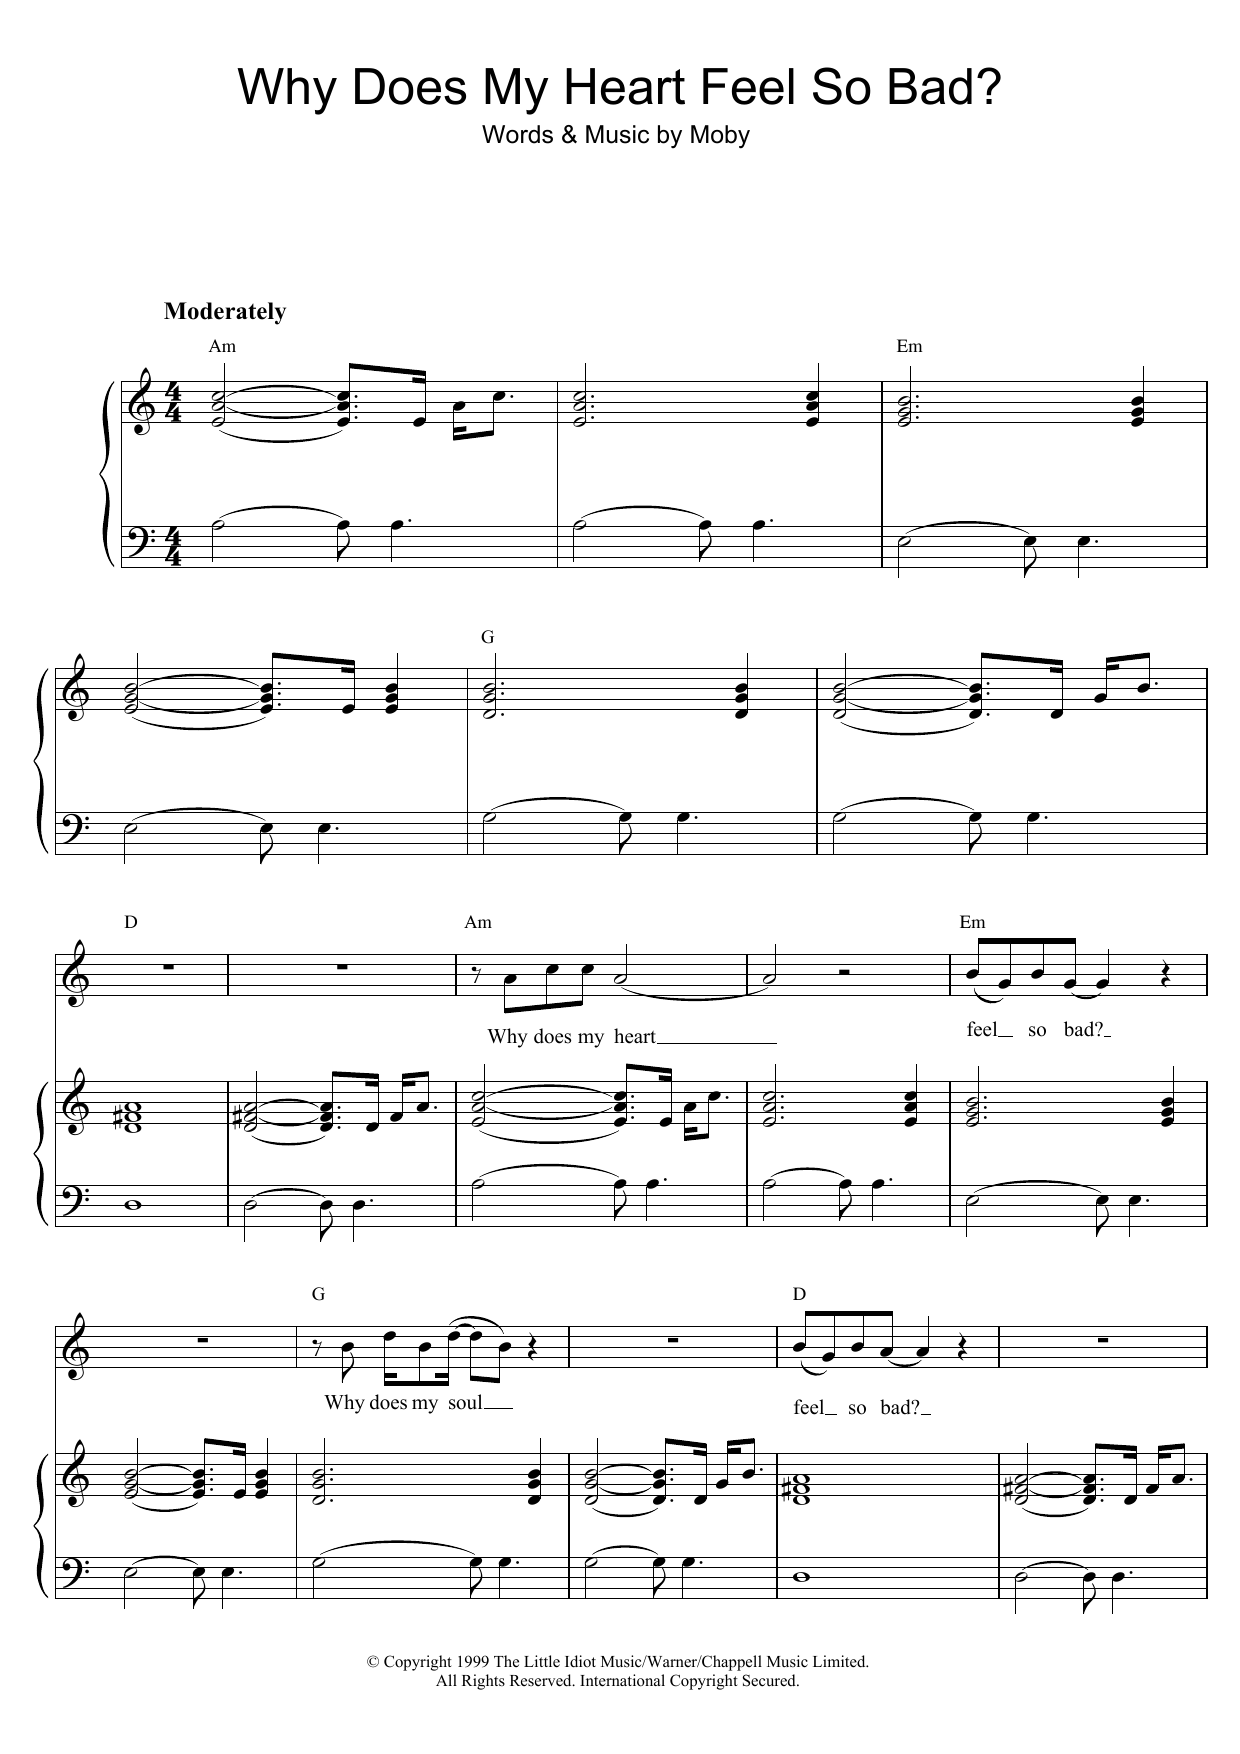 Download Moby Why Does My Heart Feel So Bad? Sheet Music